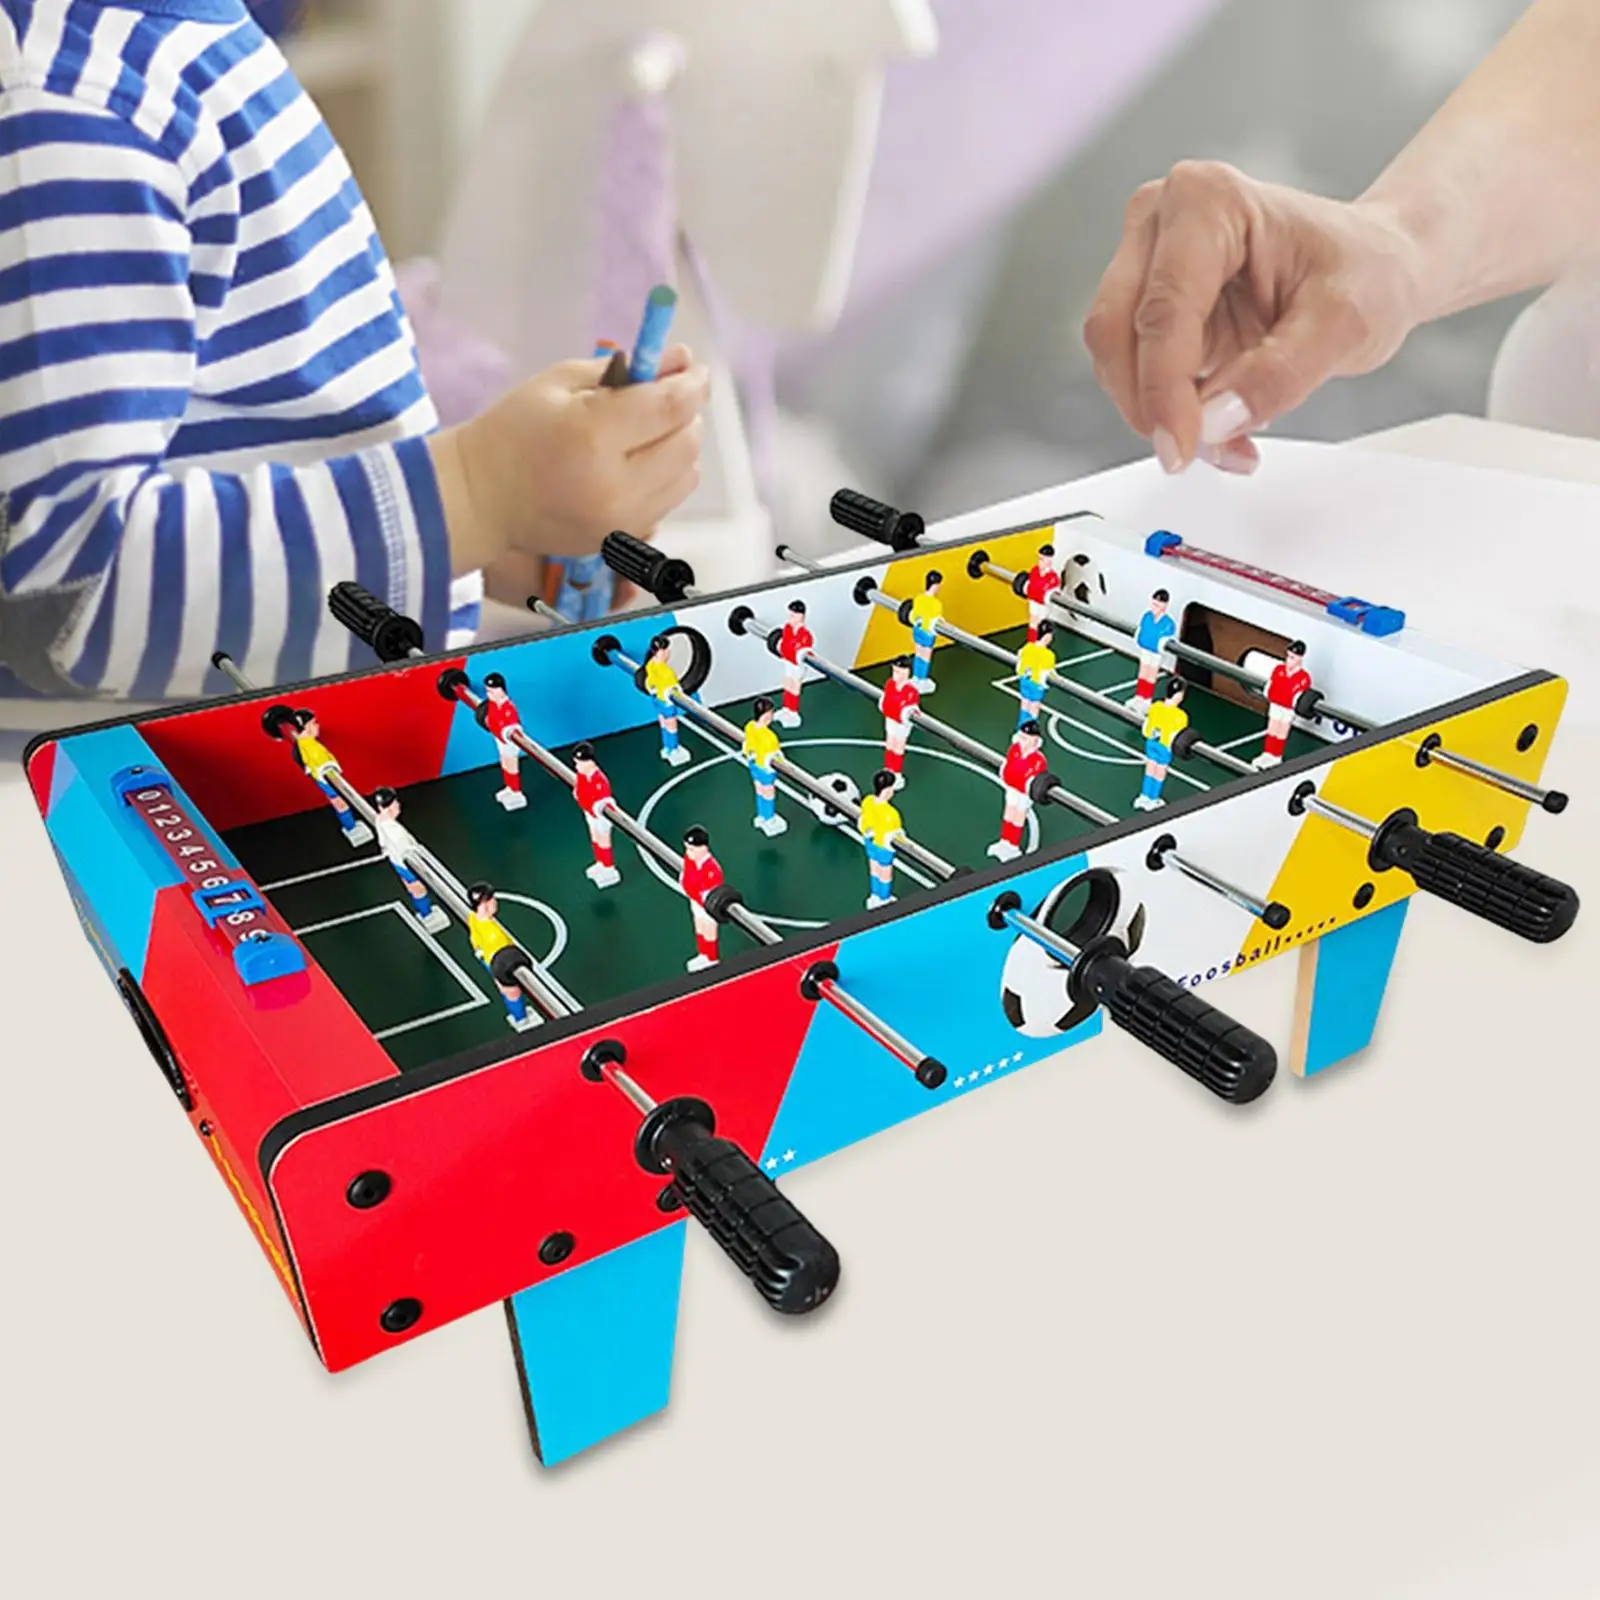 Small Foosball Table, Table Top Soccer Game Indoor Sport Toy